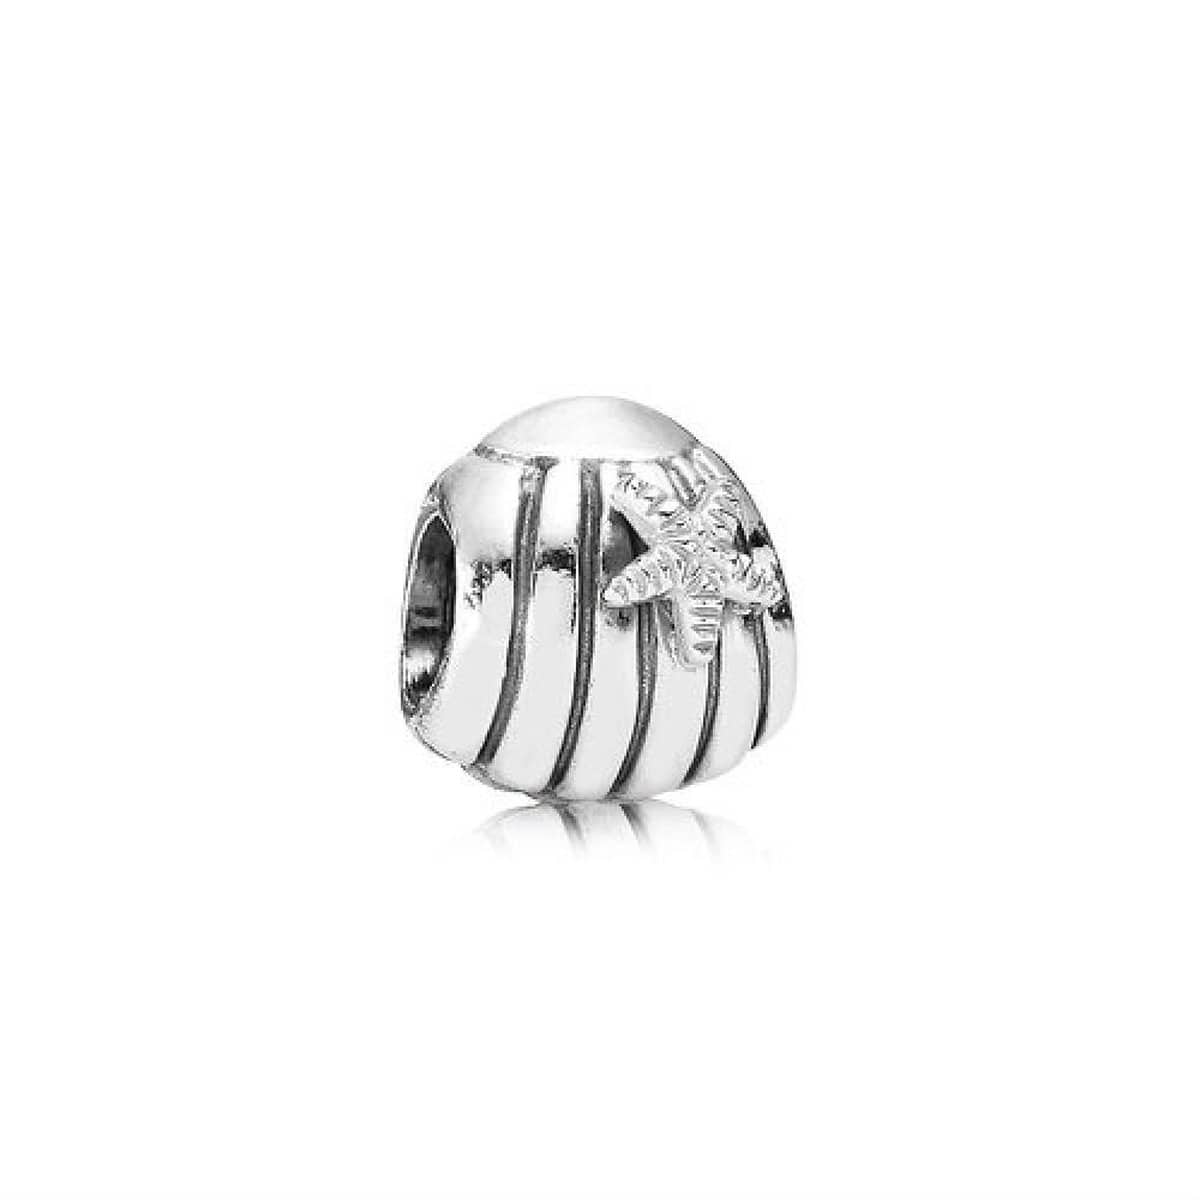 Cow Sterling Silver Charm - 790565